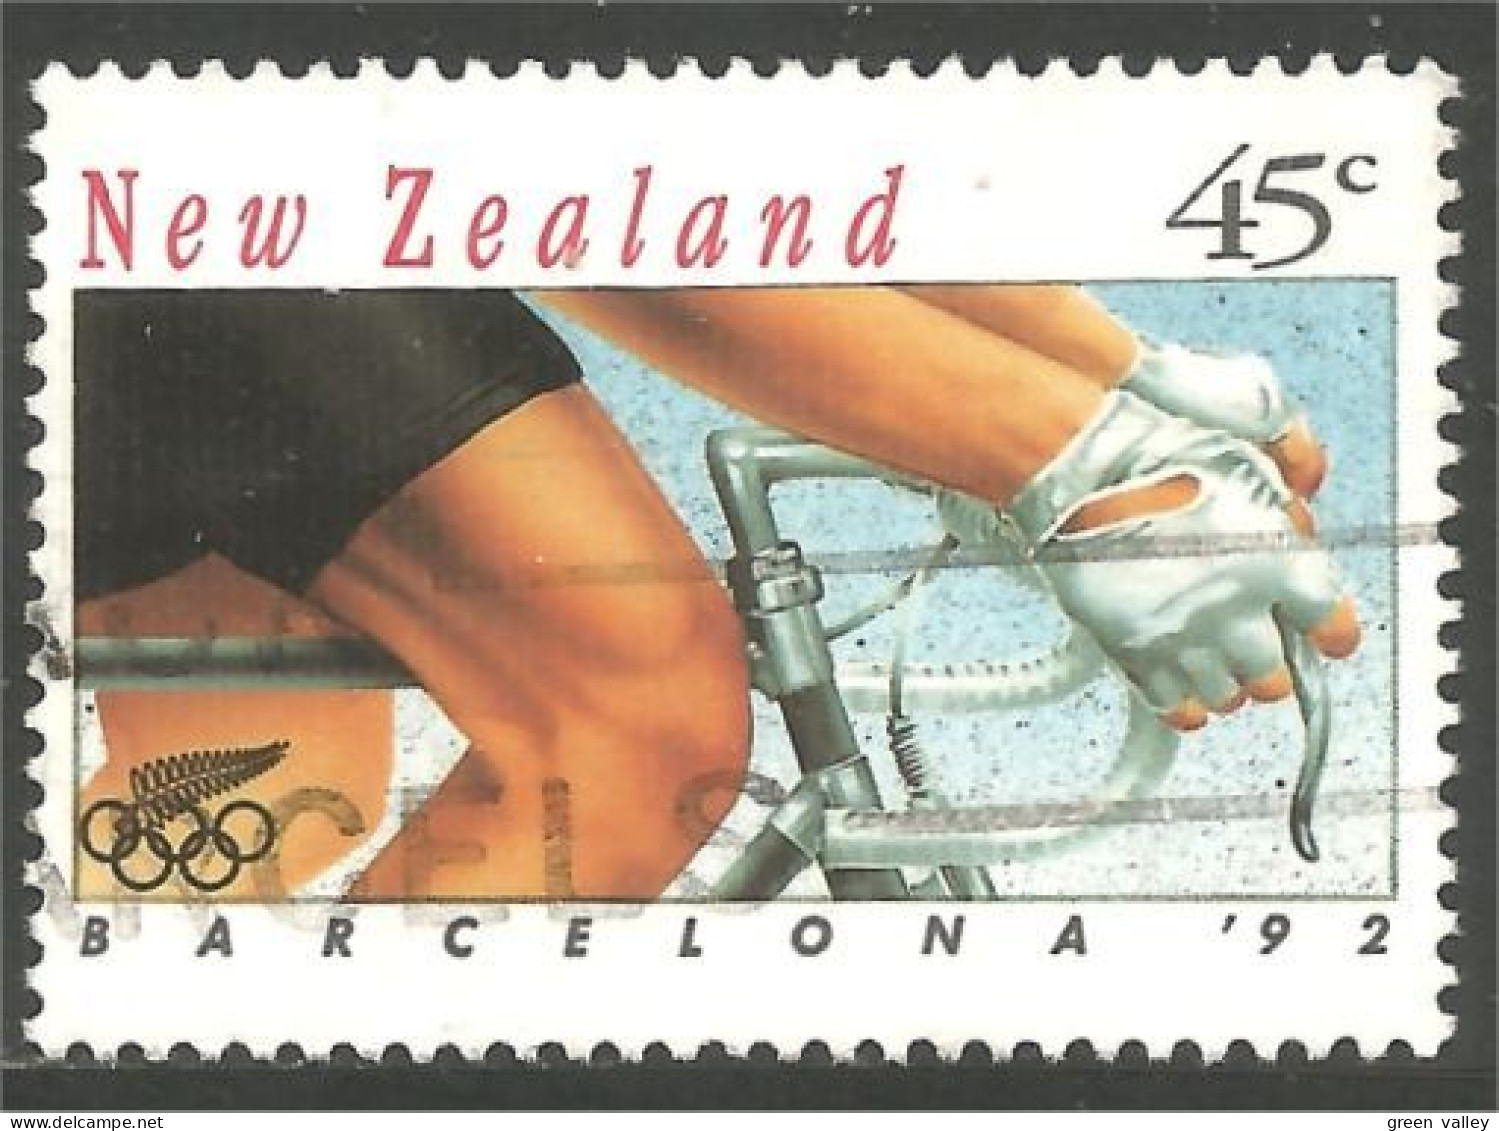 706 New Zealand Olympiques Barcelone Cycling Bicycle Race Fahrrad Bicyclette Vélo Cyclisme (NZ-155e) - Used Stamps